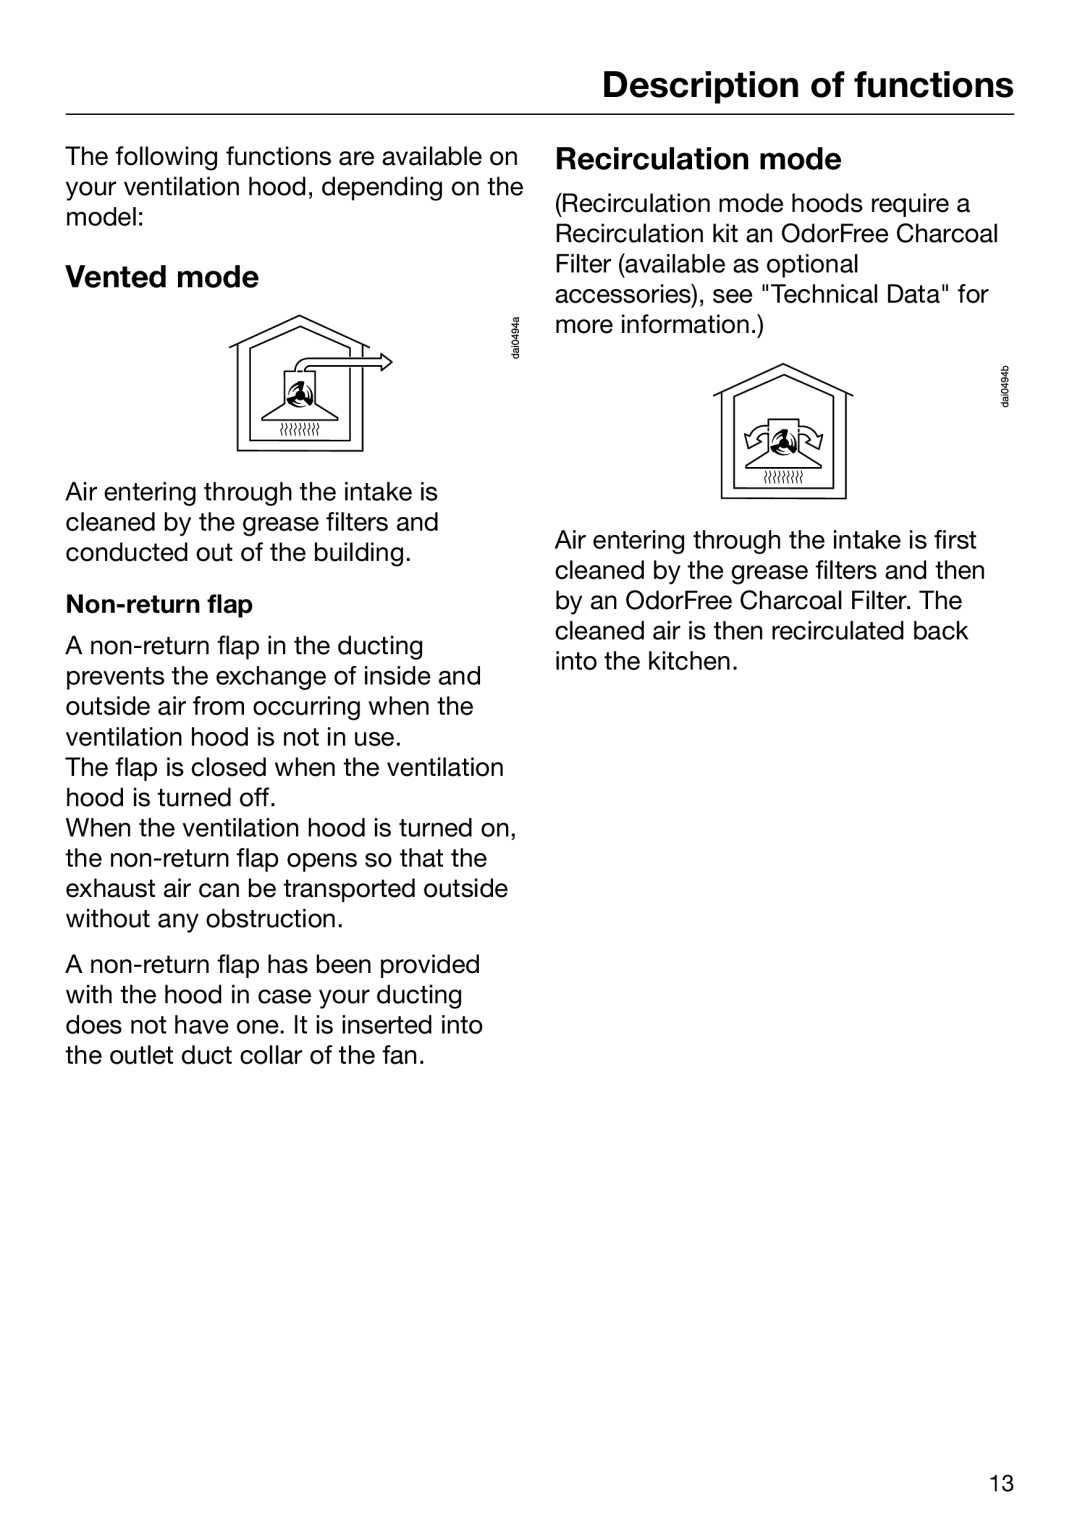 Miele 09 968 280 installation instructions Description of functions, Vented mode, Recirculation mode, Non-returnflap 